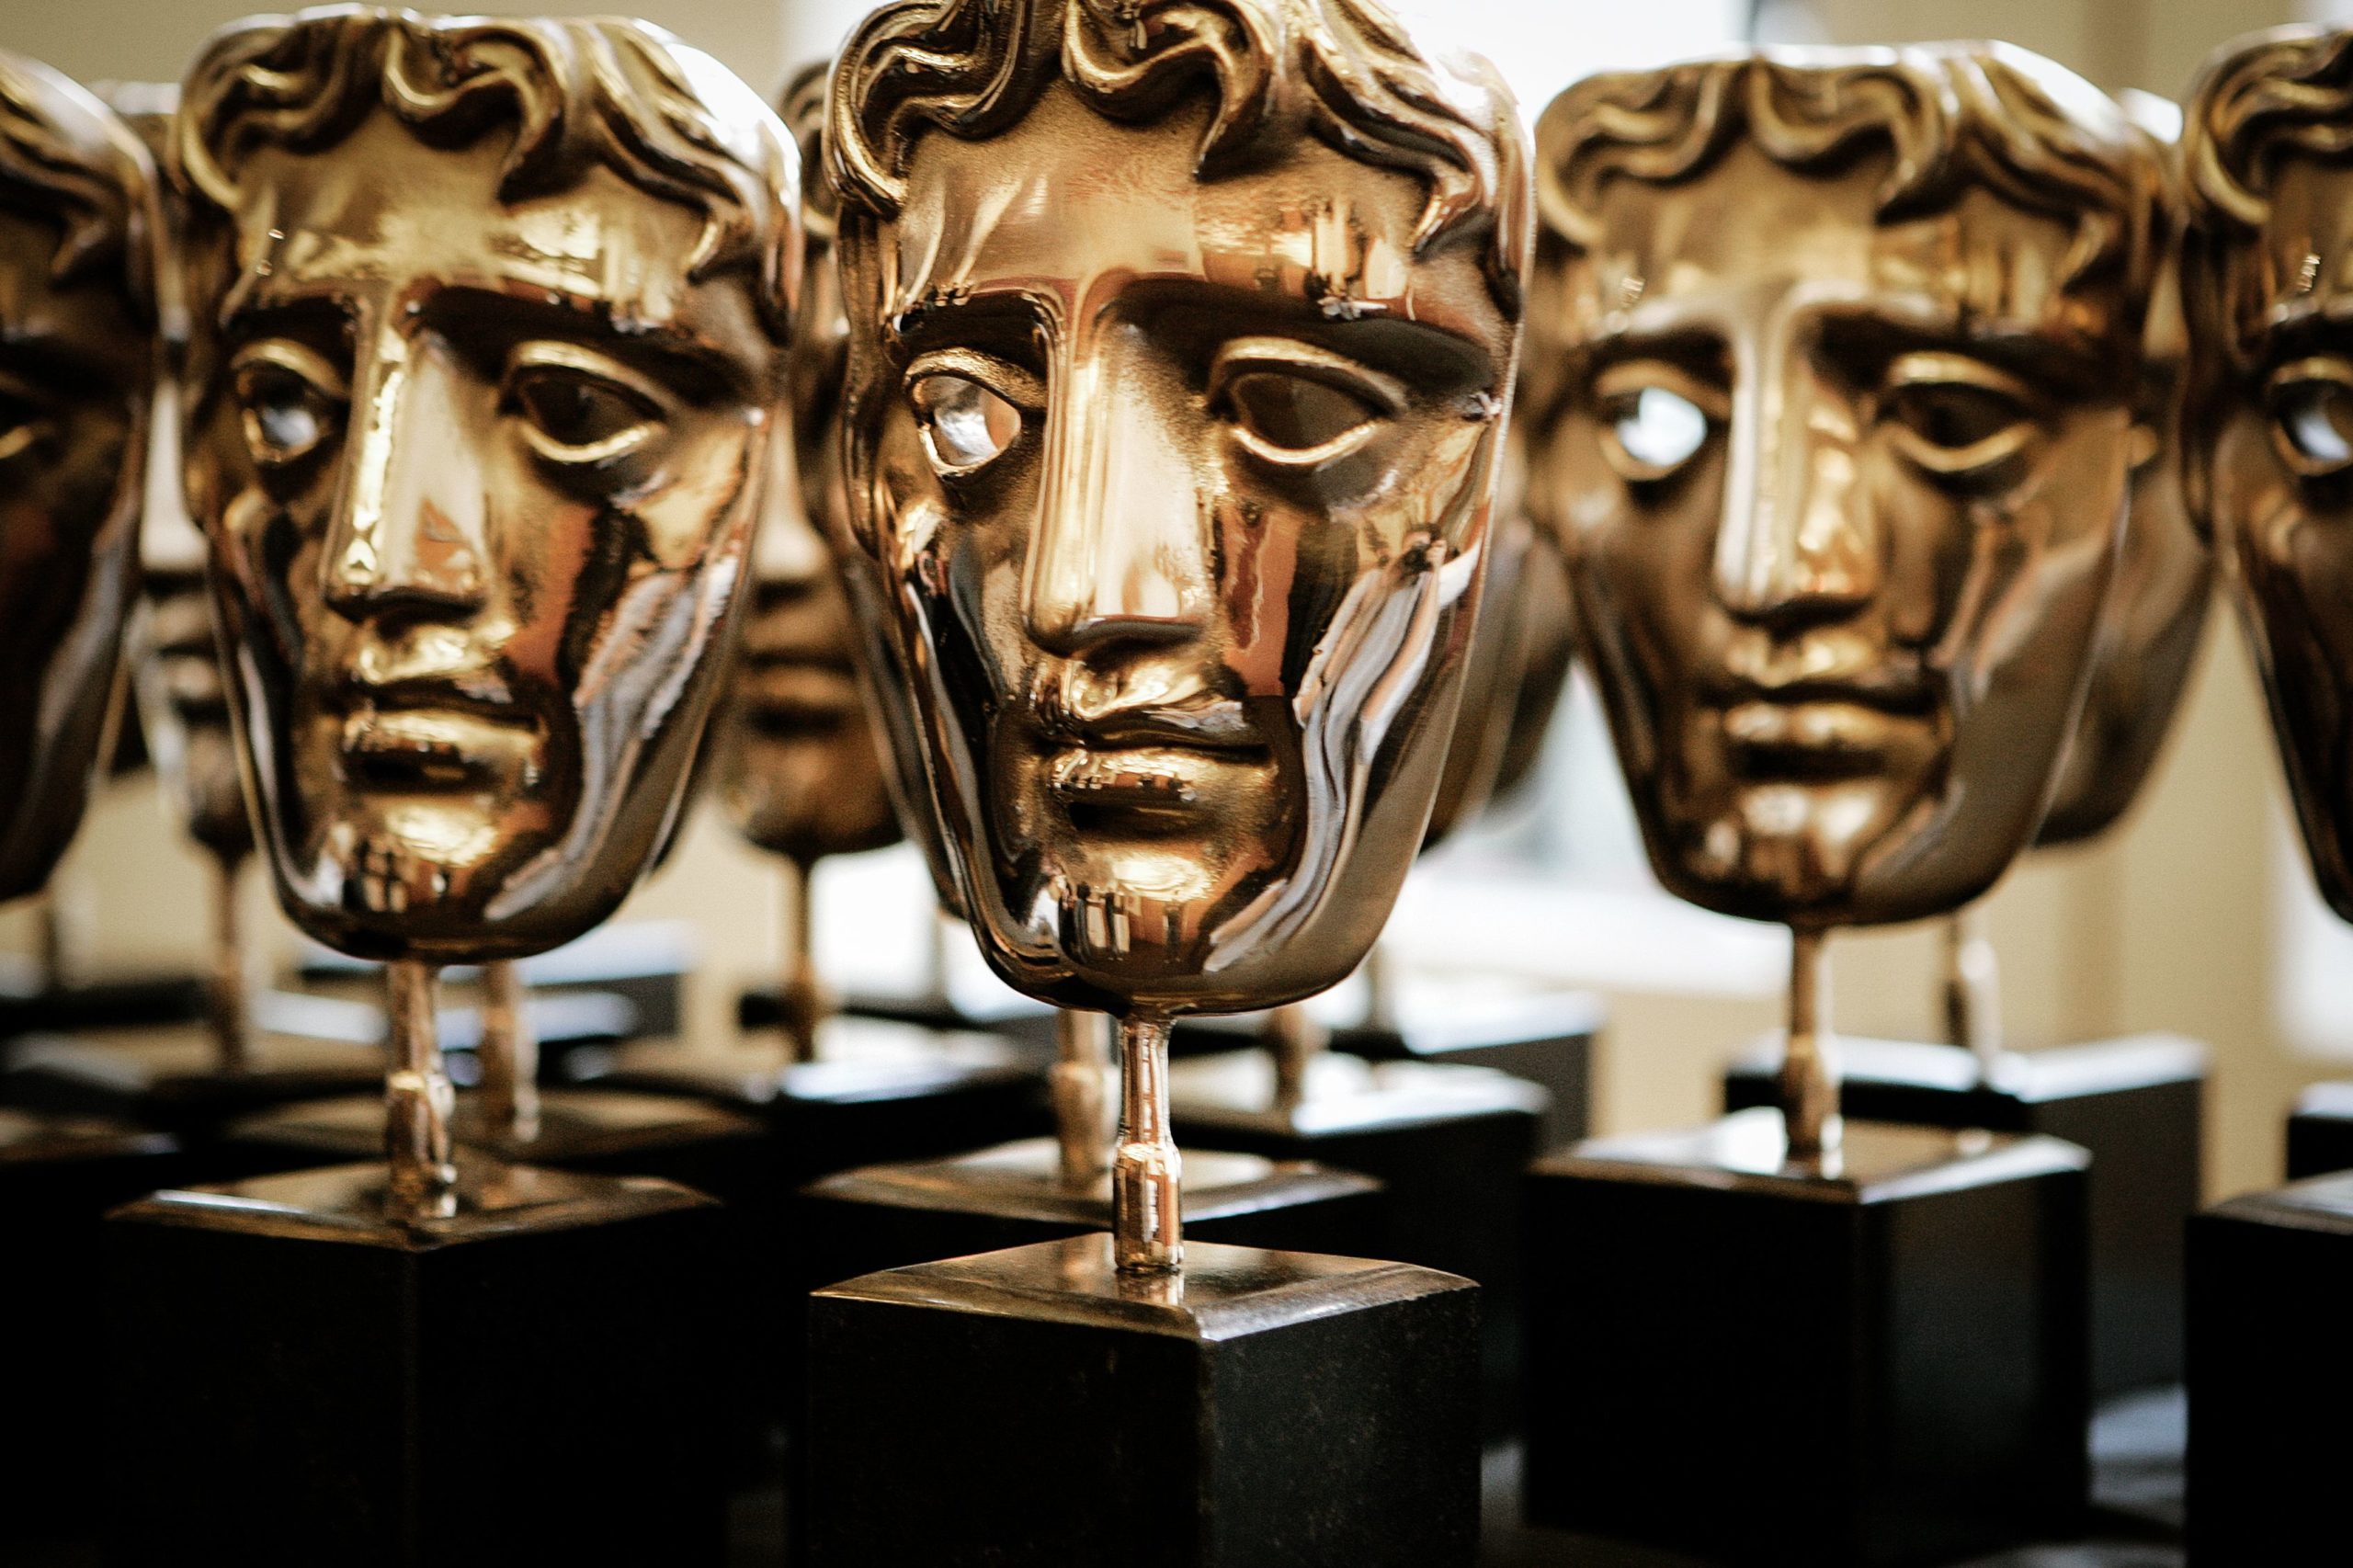 Hades sweeps the 2021 BAFTA Games Awards with 5 wins including top